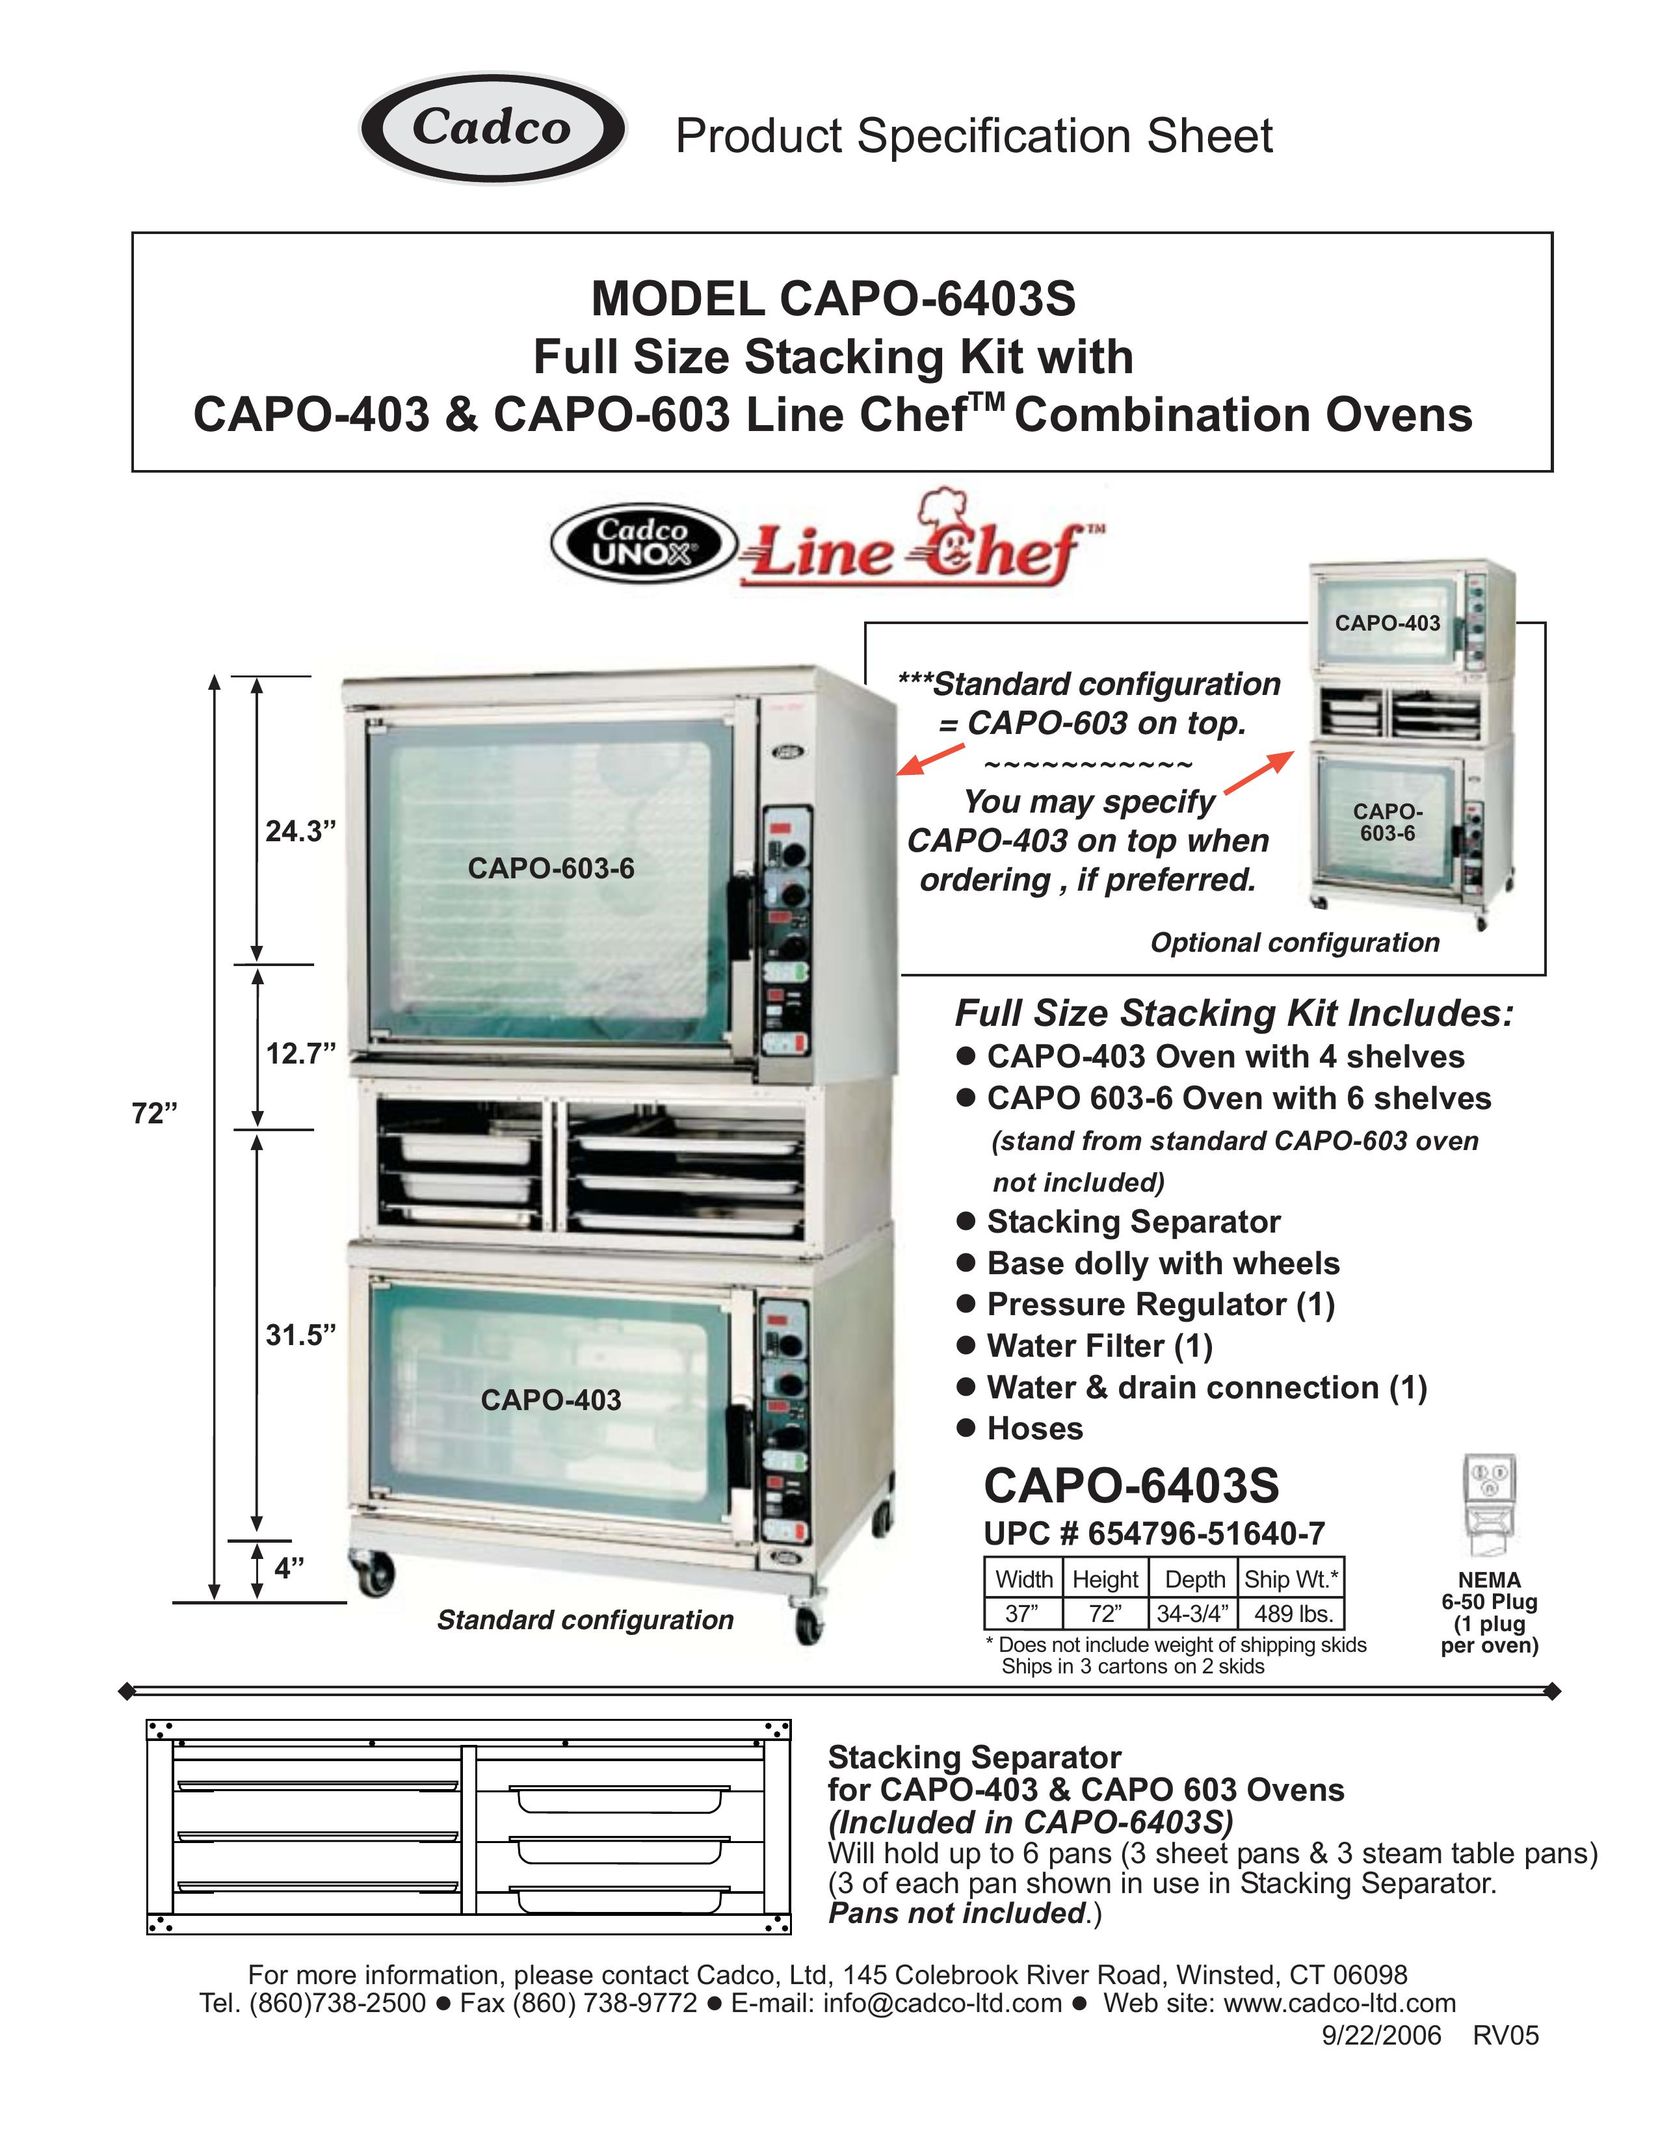 Cadco CAPO-6403S Microwave Oven User Manual